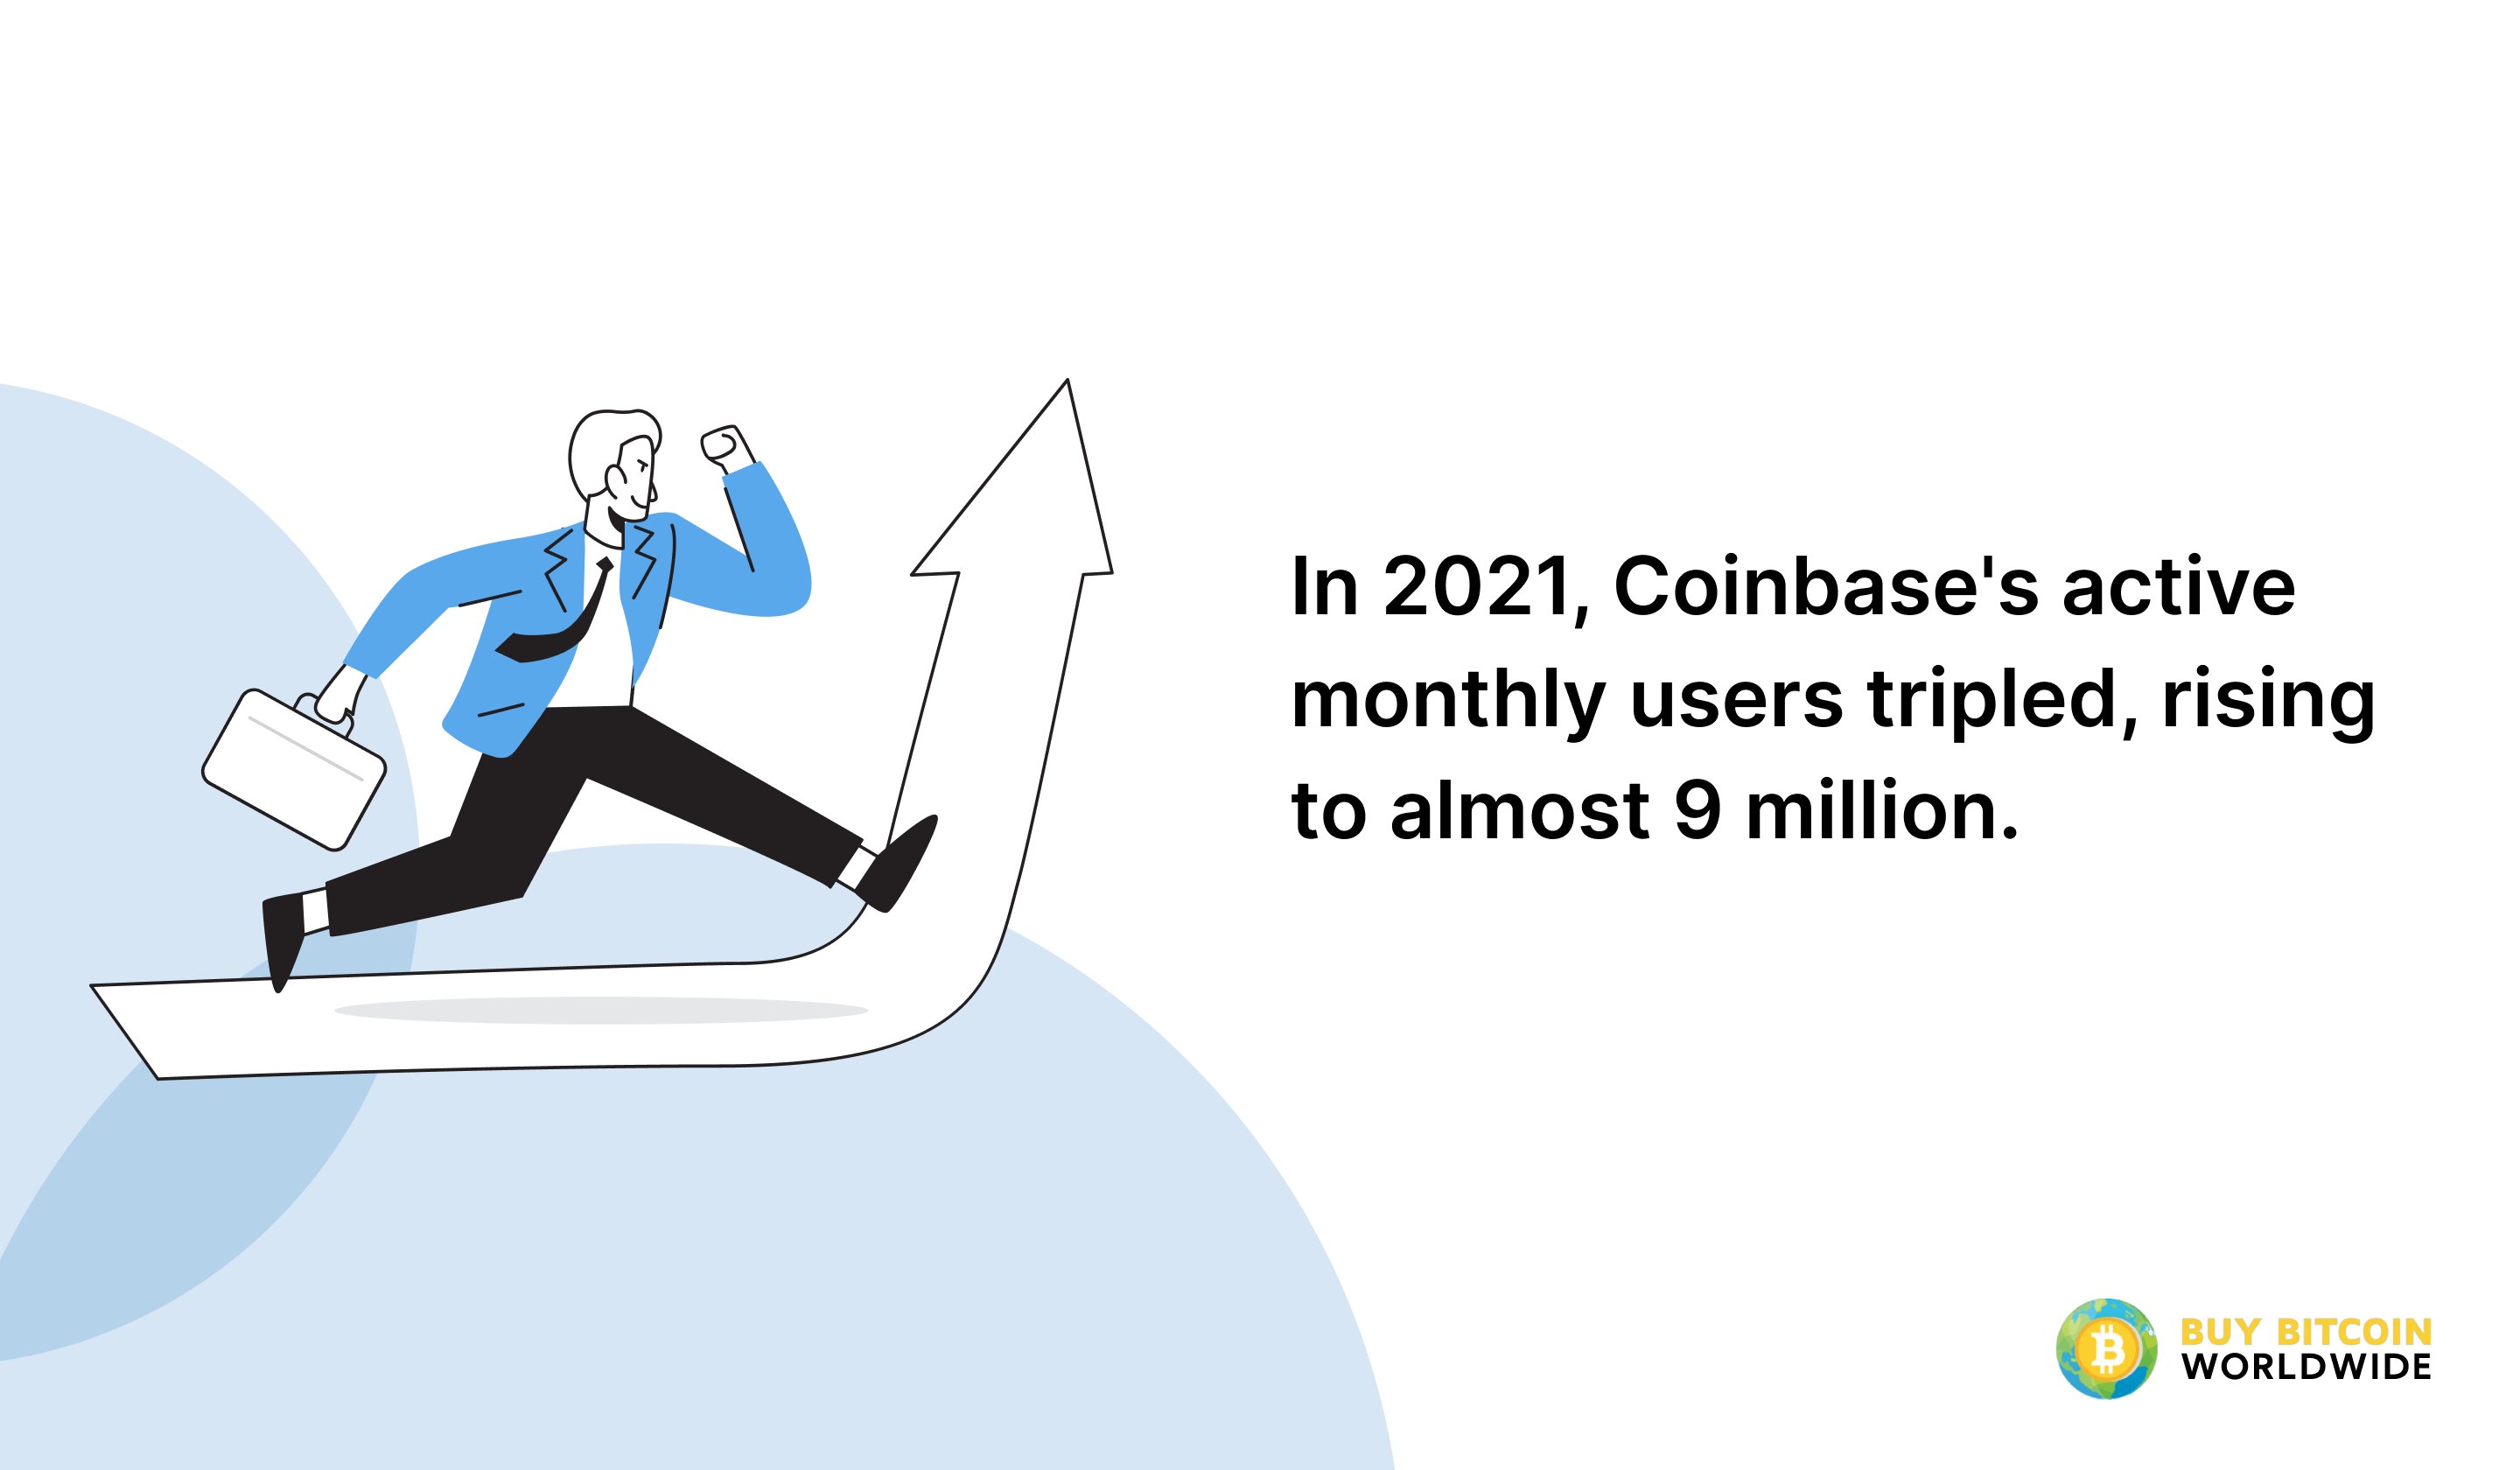 coinbase active monthly users in 2021